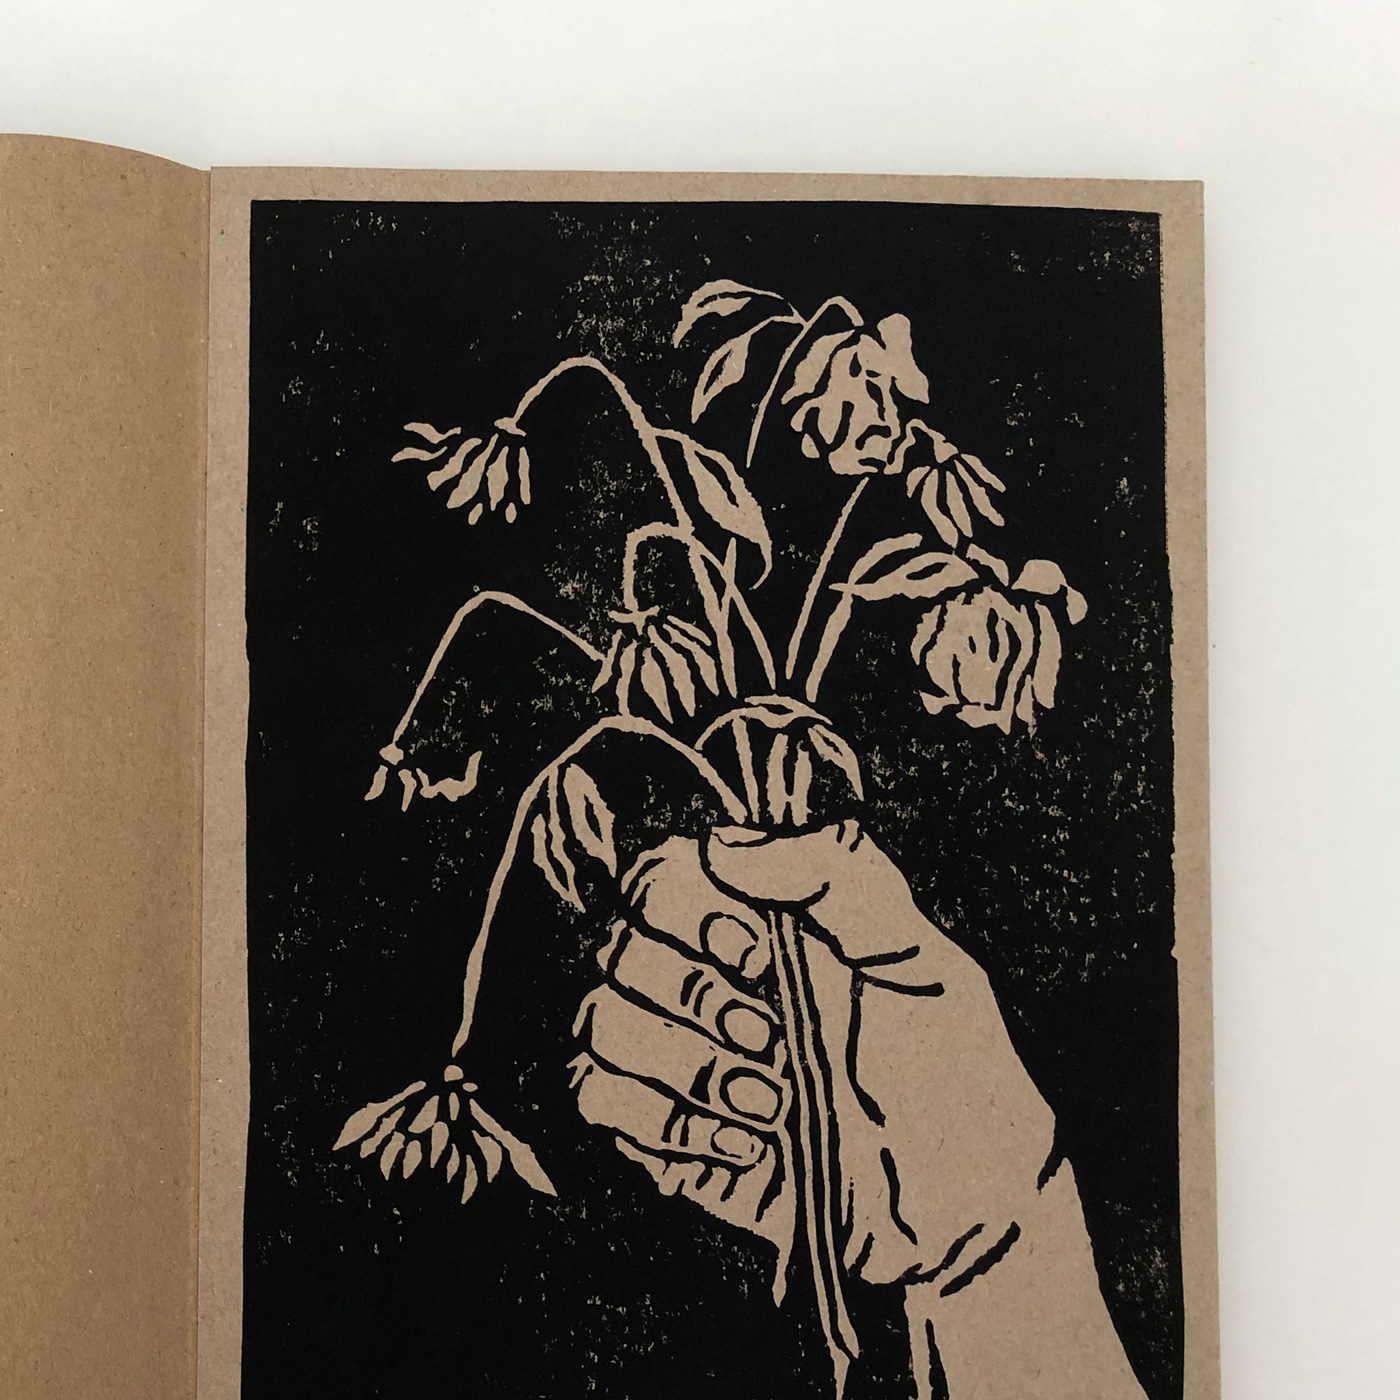 detail of a linocut printed illustration with a hand holding a bunch of wither flowers